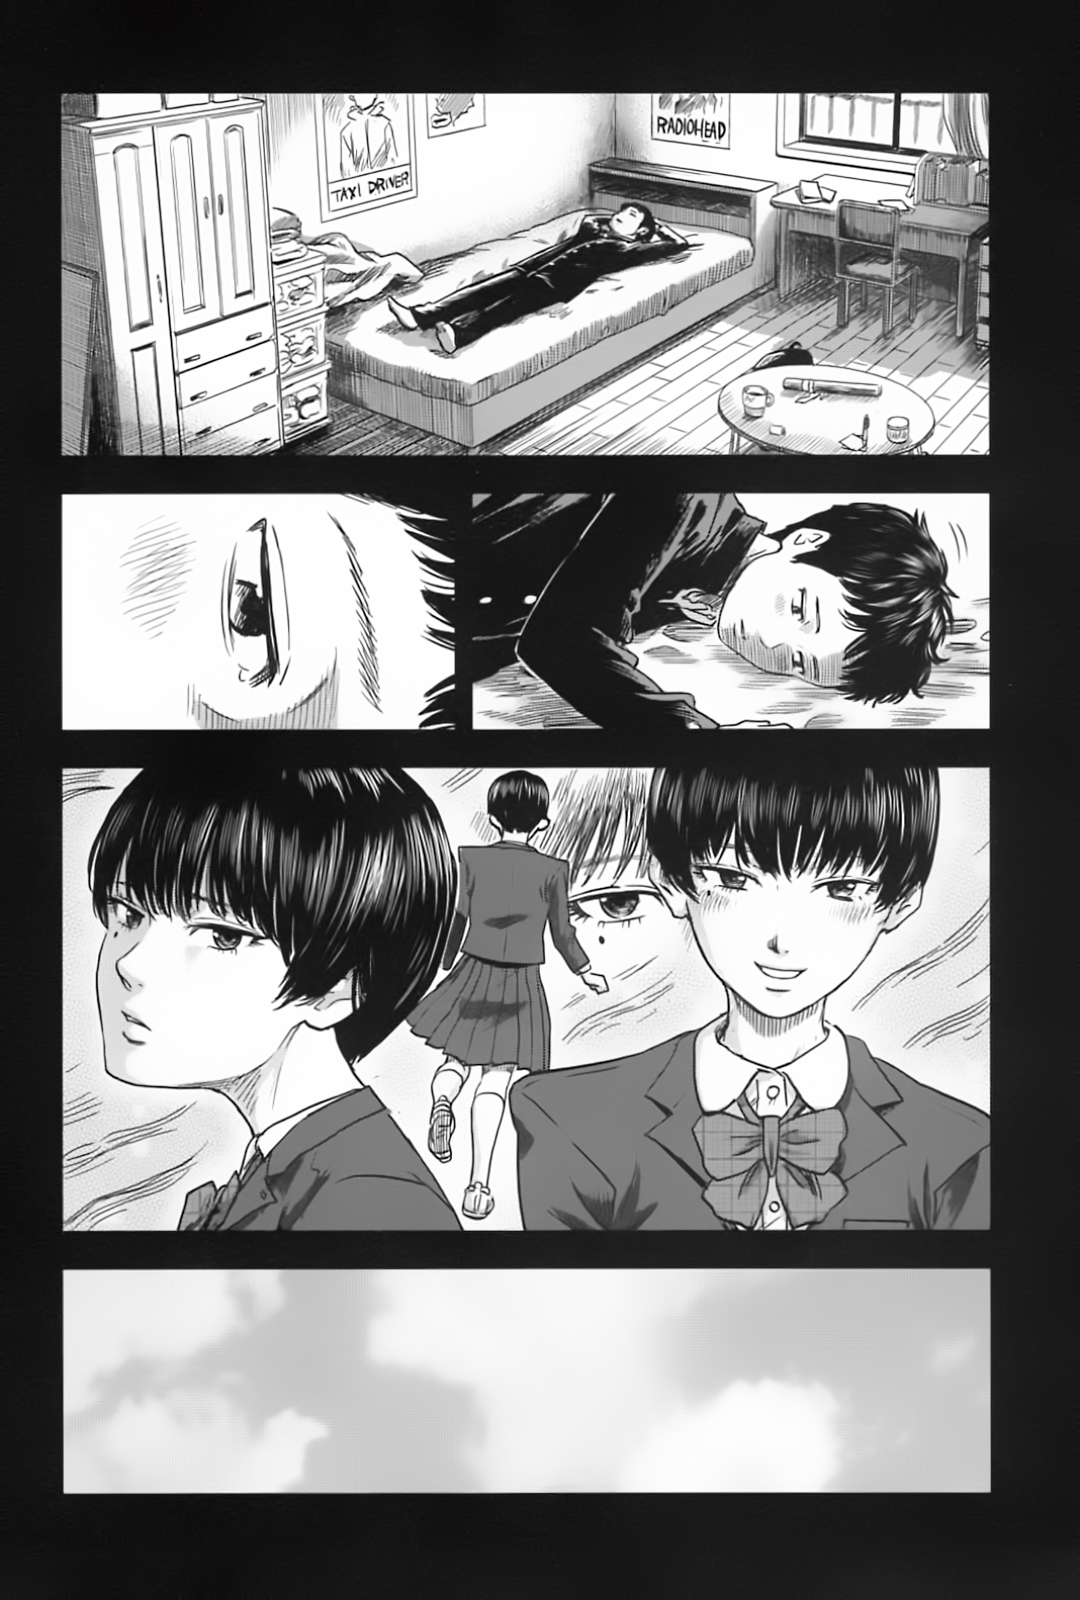 Hyouryuu Net Cafe Vol.7 Chapter 61: The True Colors Of This World - Picture 3